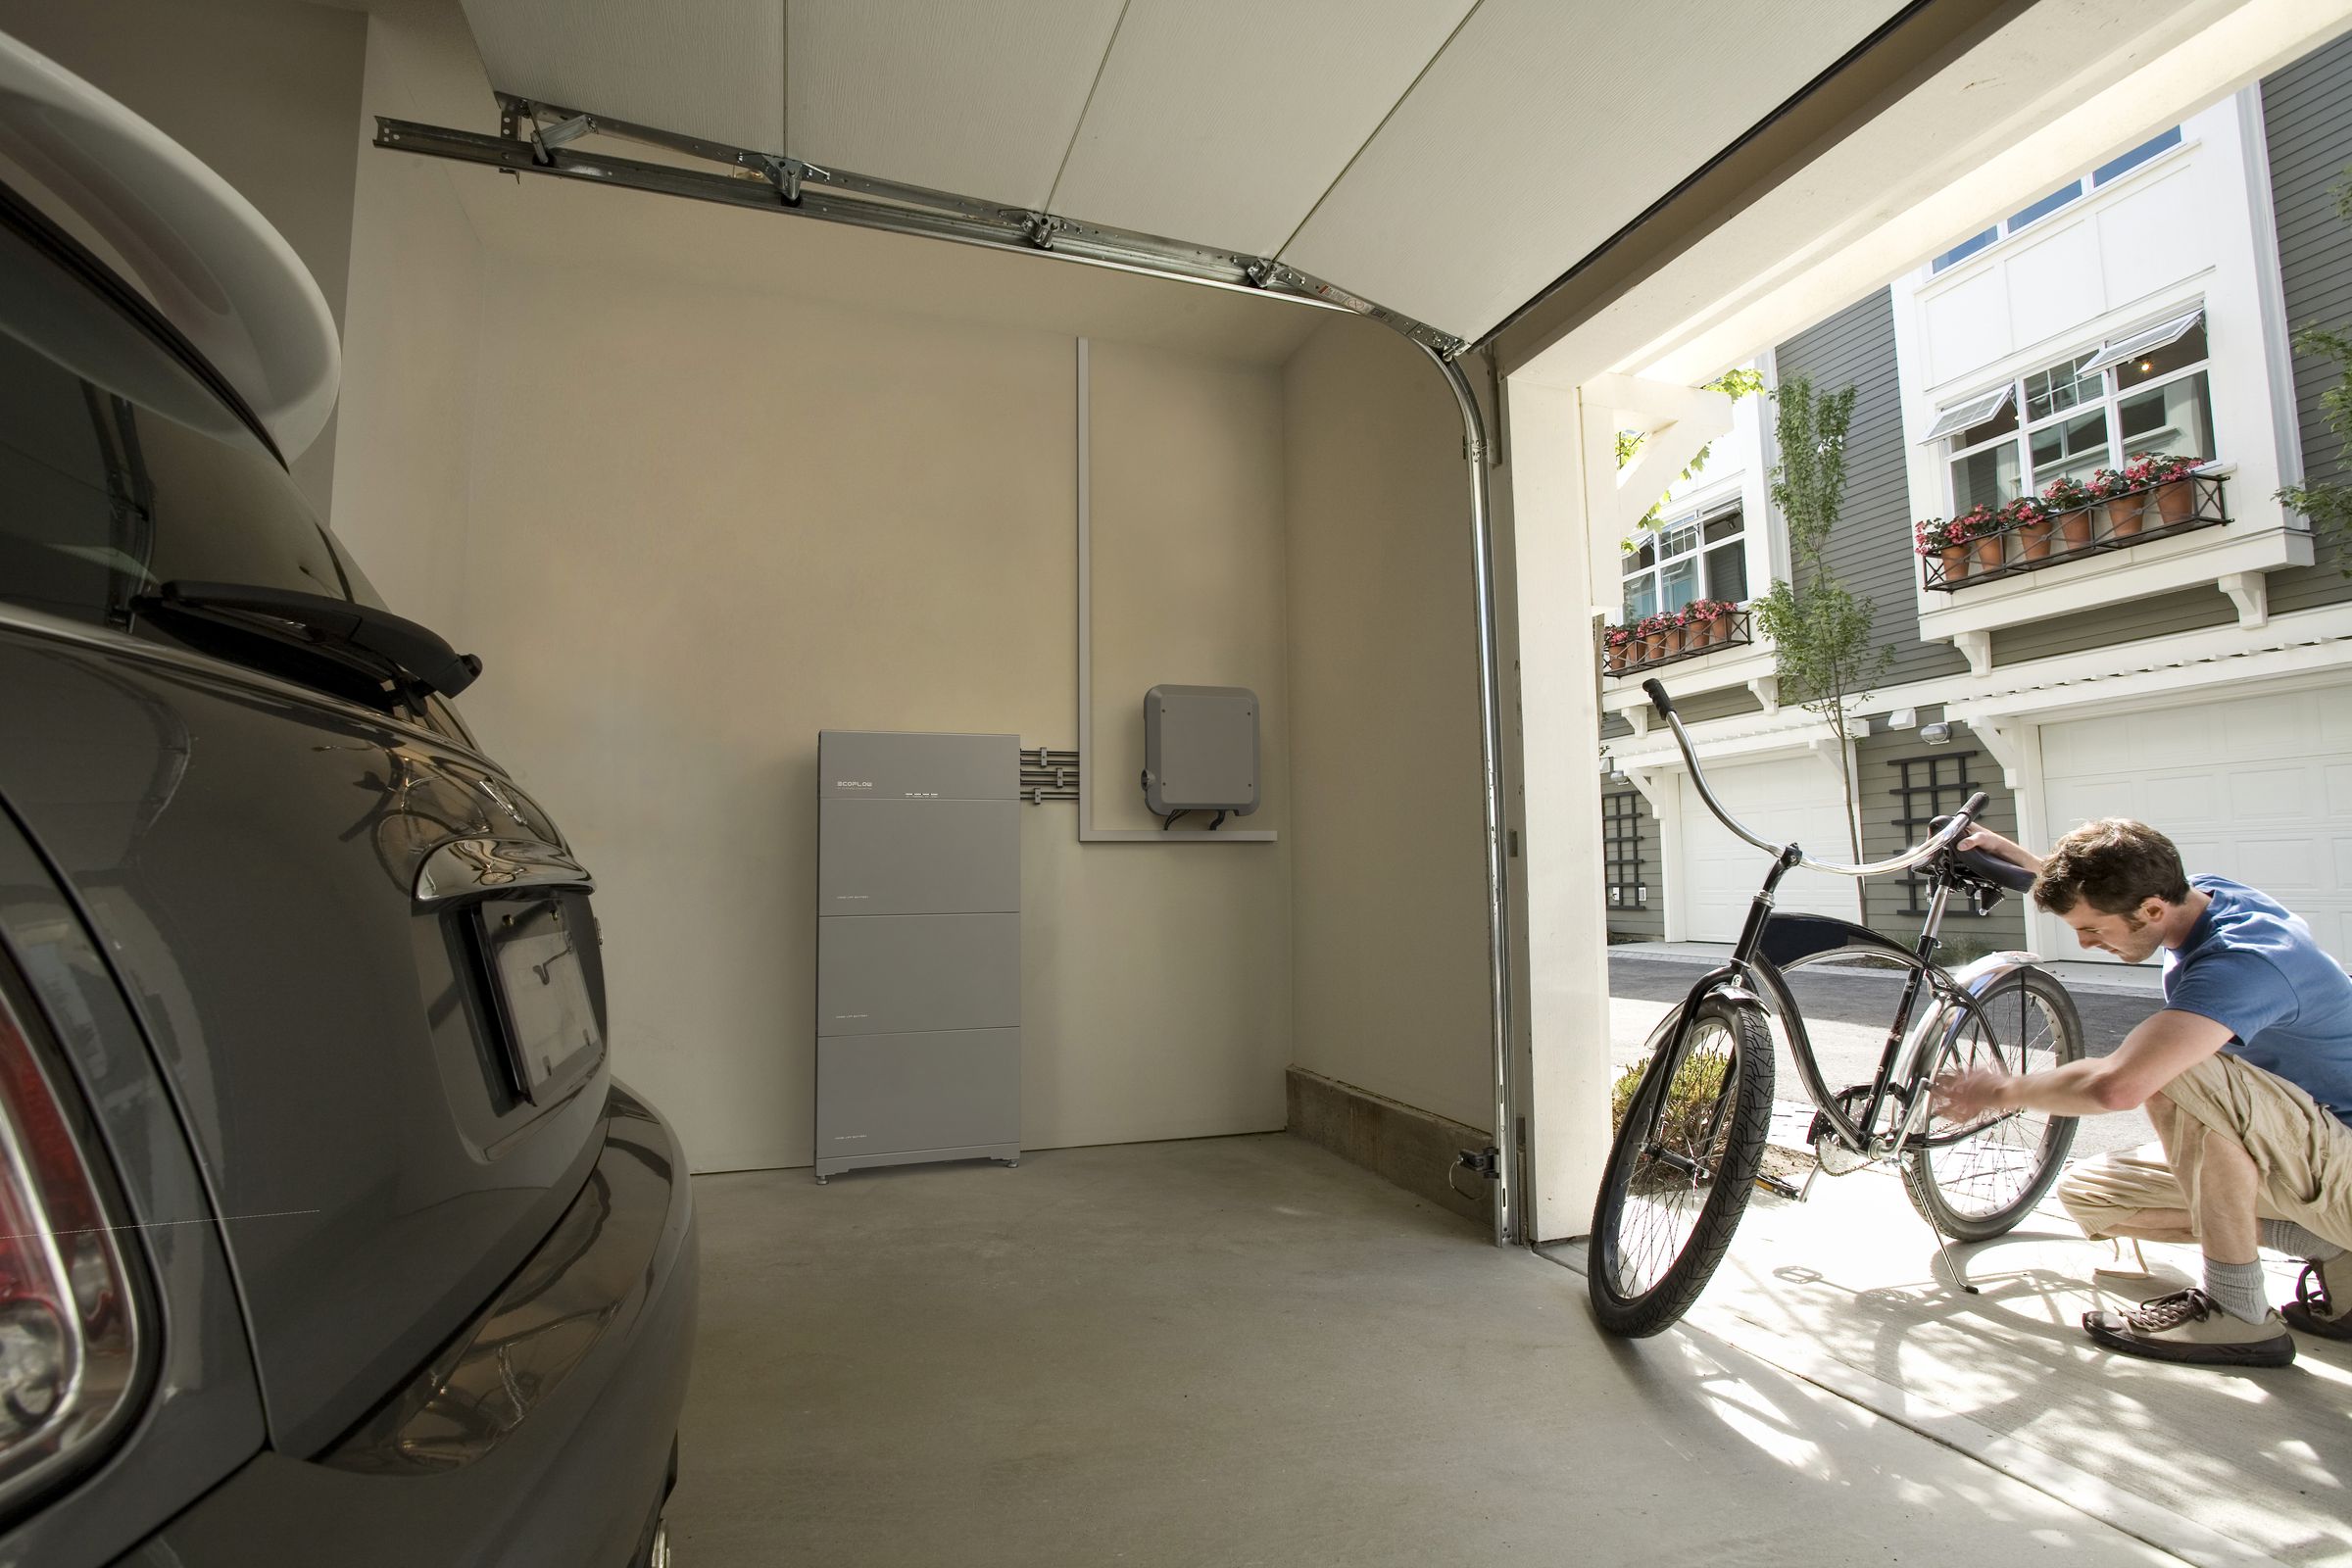 A PowerOcean DC Fit battery solution is retrofitted into an existing solar system in this garage.